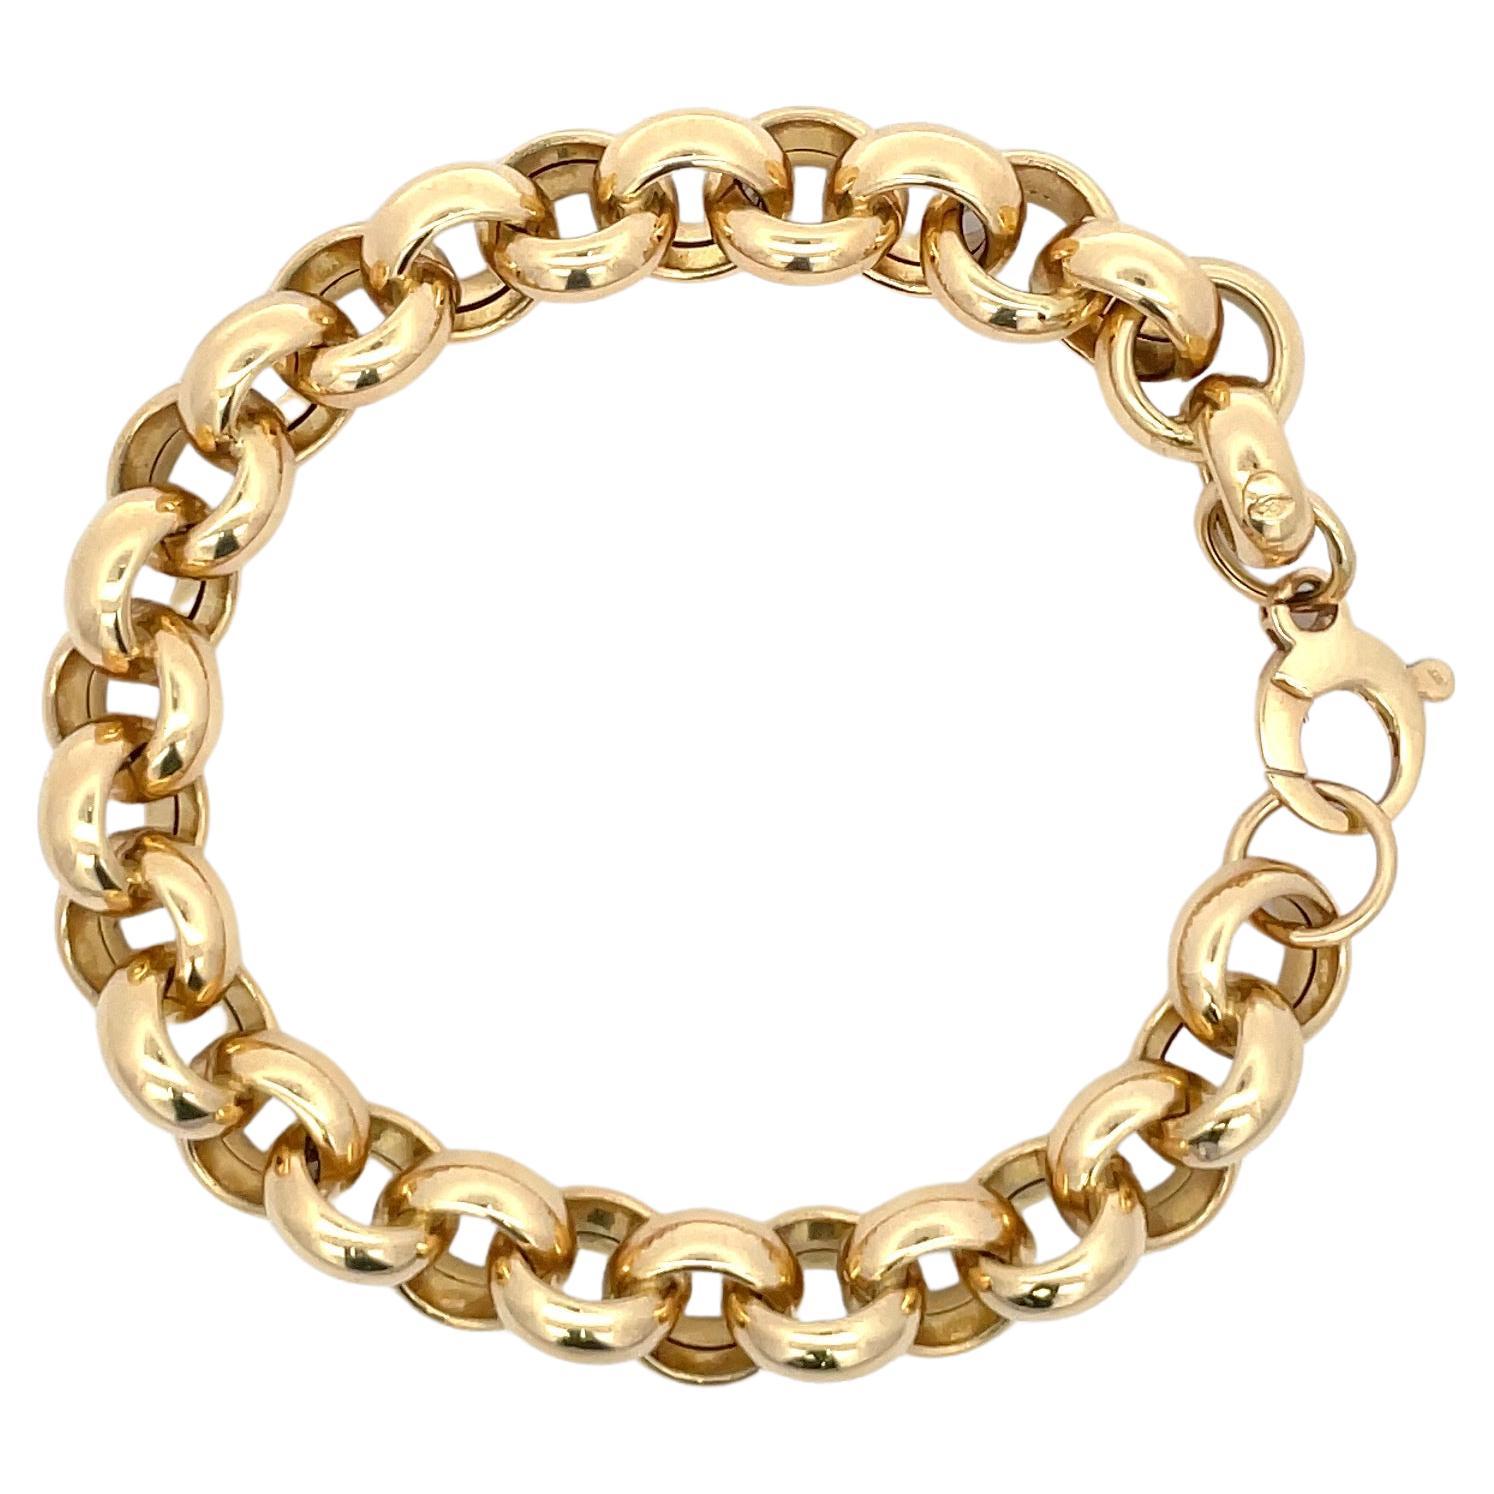 18 Karat Yellow Gold bracelet featuring 28 Rolo links weighing 20.6 Grams, made in Italy.
More Rolo links available 
11.6 MM Links
Search Harbor Diamonds